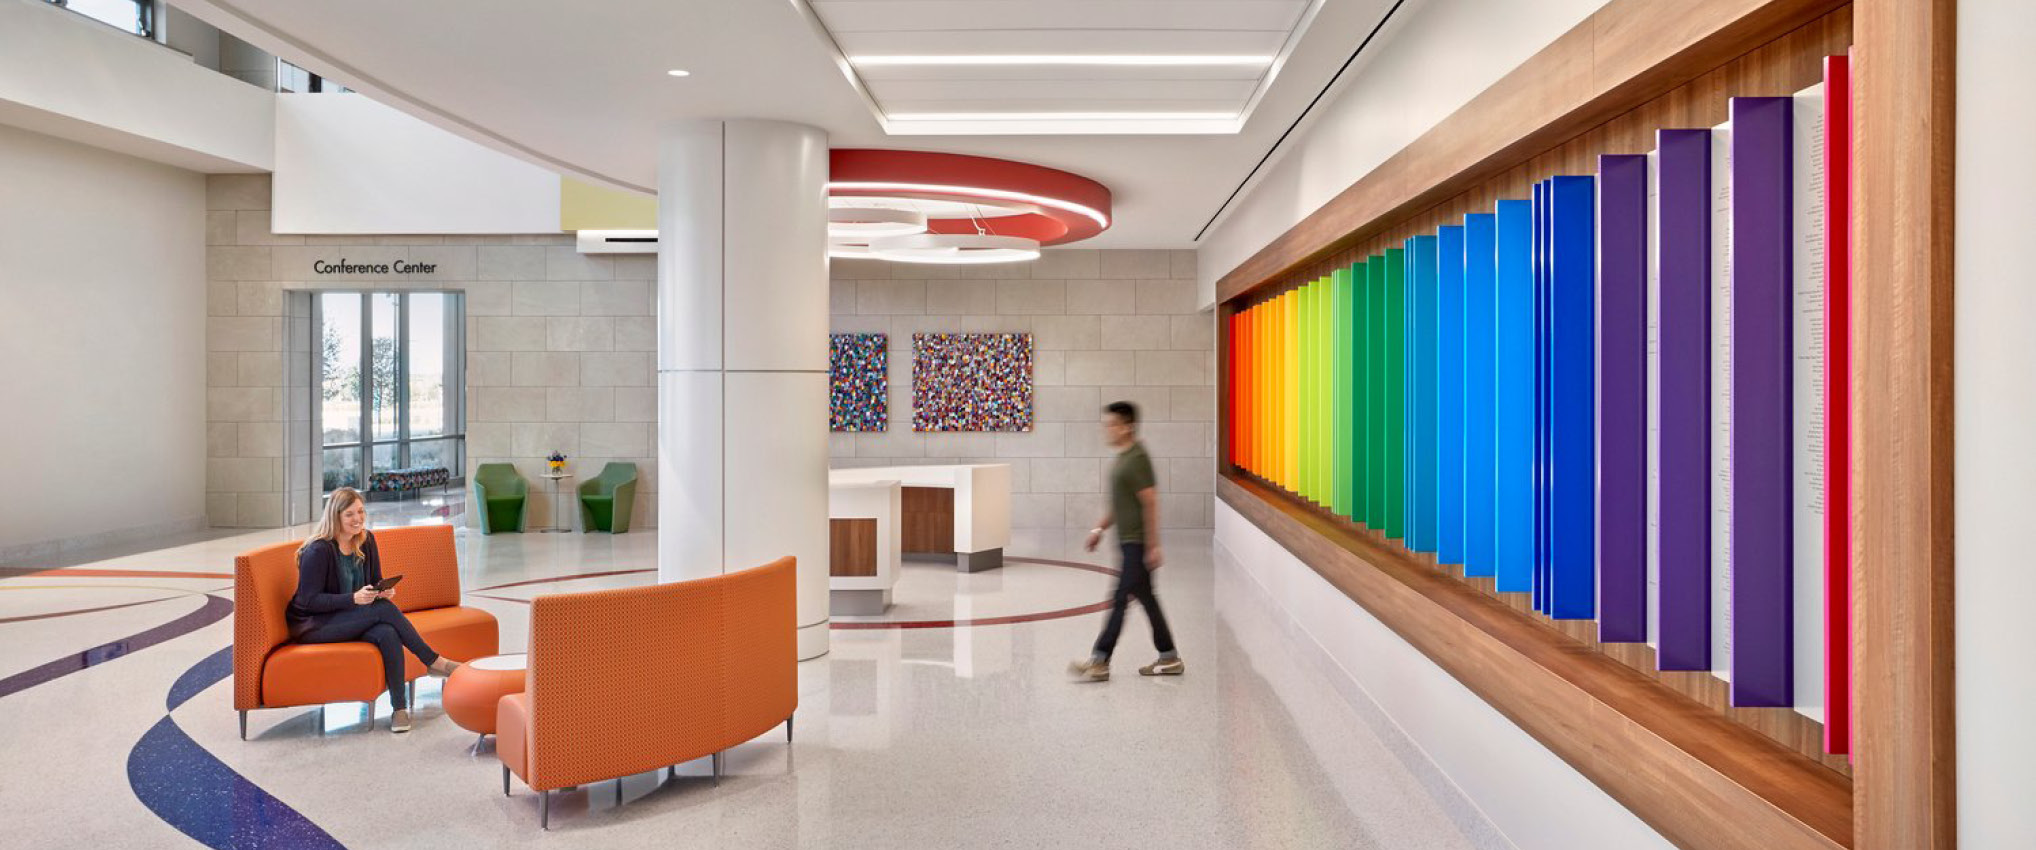 HKS’ Upali Nanda Explains That Art in Health Care Facilities Can Help People Heal